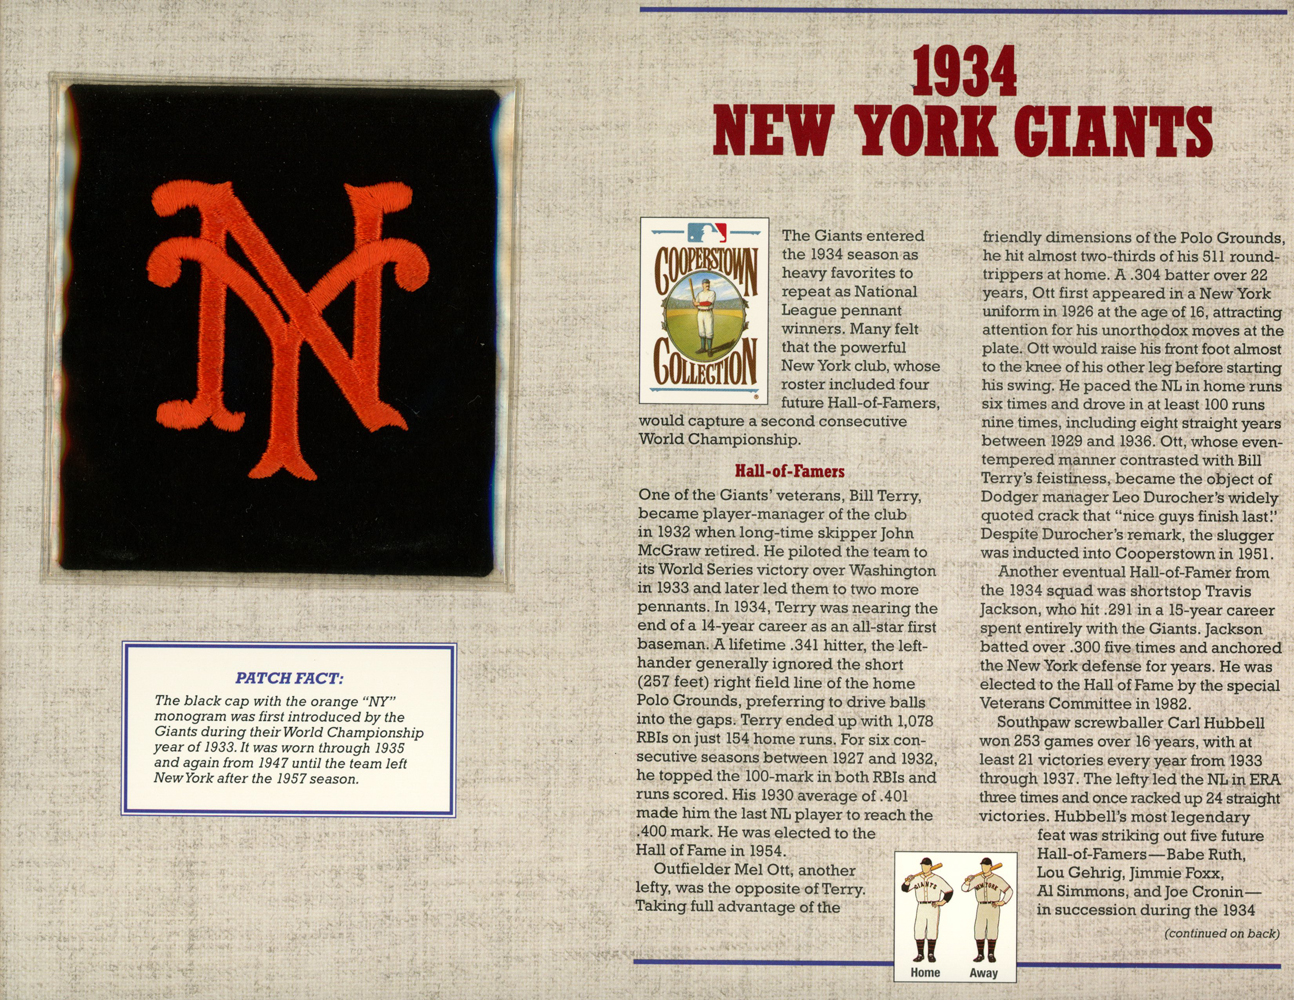 New York Giants 1934 Patch Stat Card Cooperstown Official Willabee & Ward